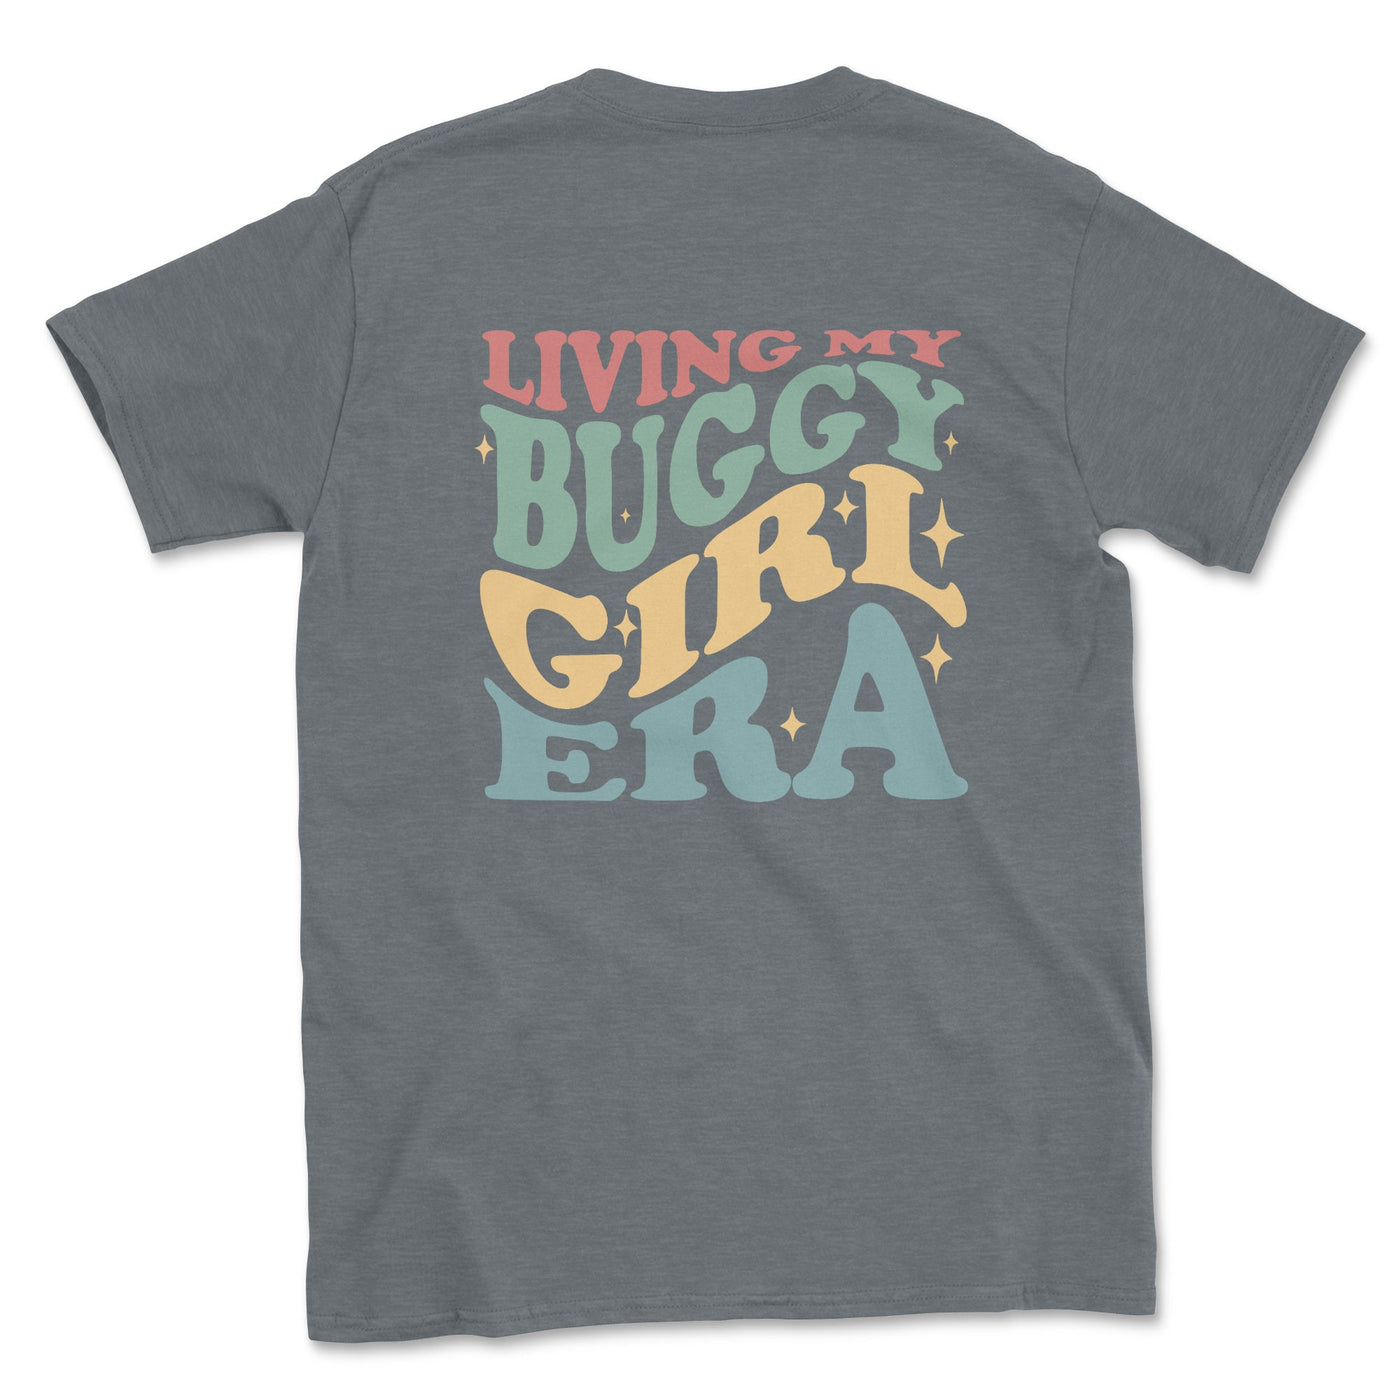 Living My Buggy Girl Era Graphic Tee - Goats Trail Off-Road Apparel Company